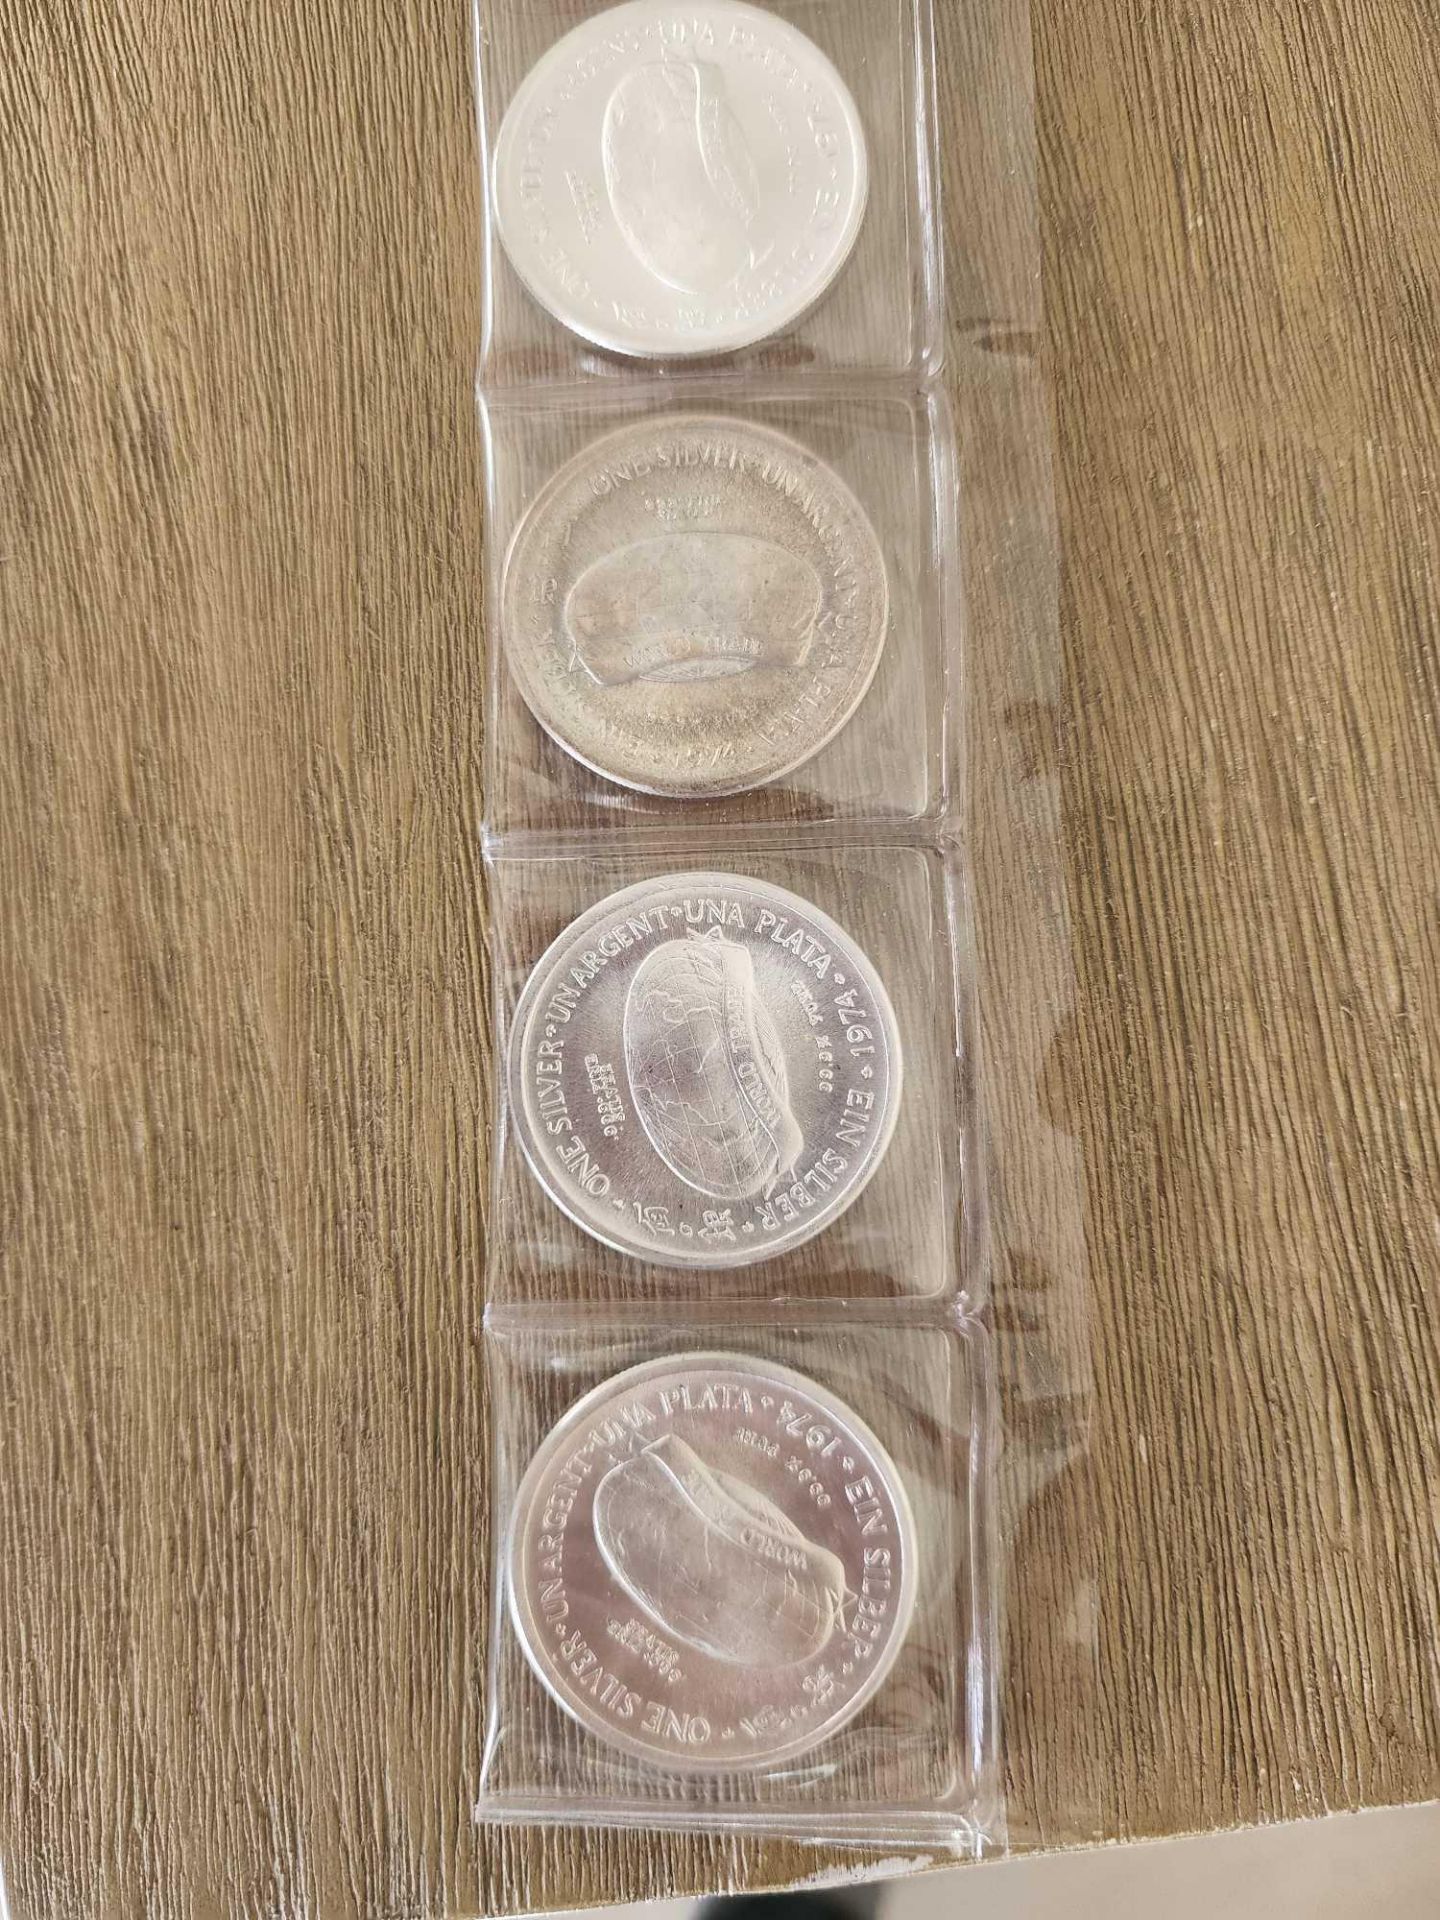 5 World Trade International Silver Vintage Silver Coins 1 oz Coins - Image 4 of 6